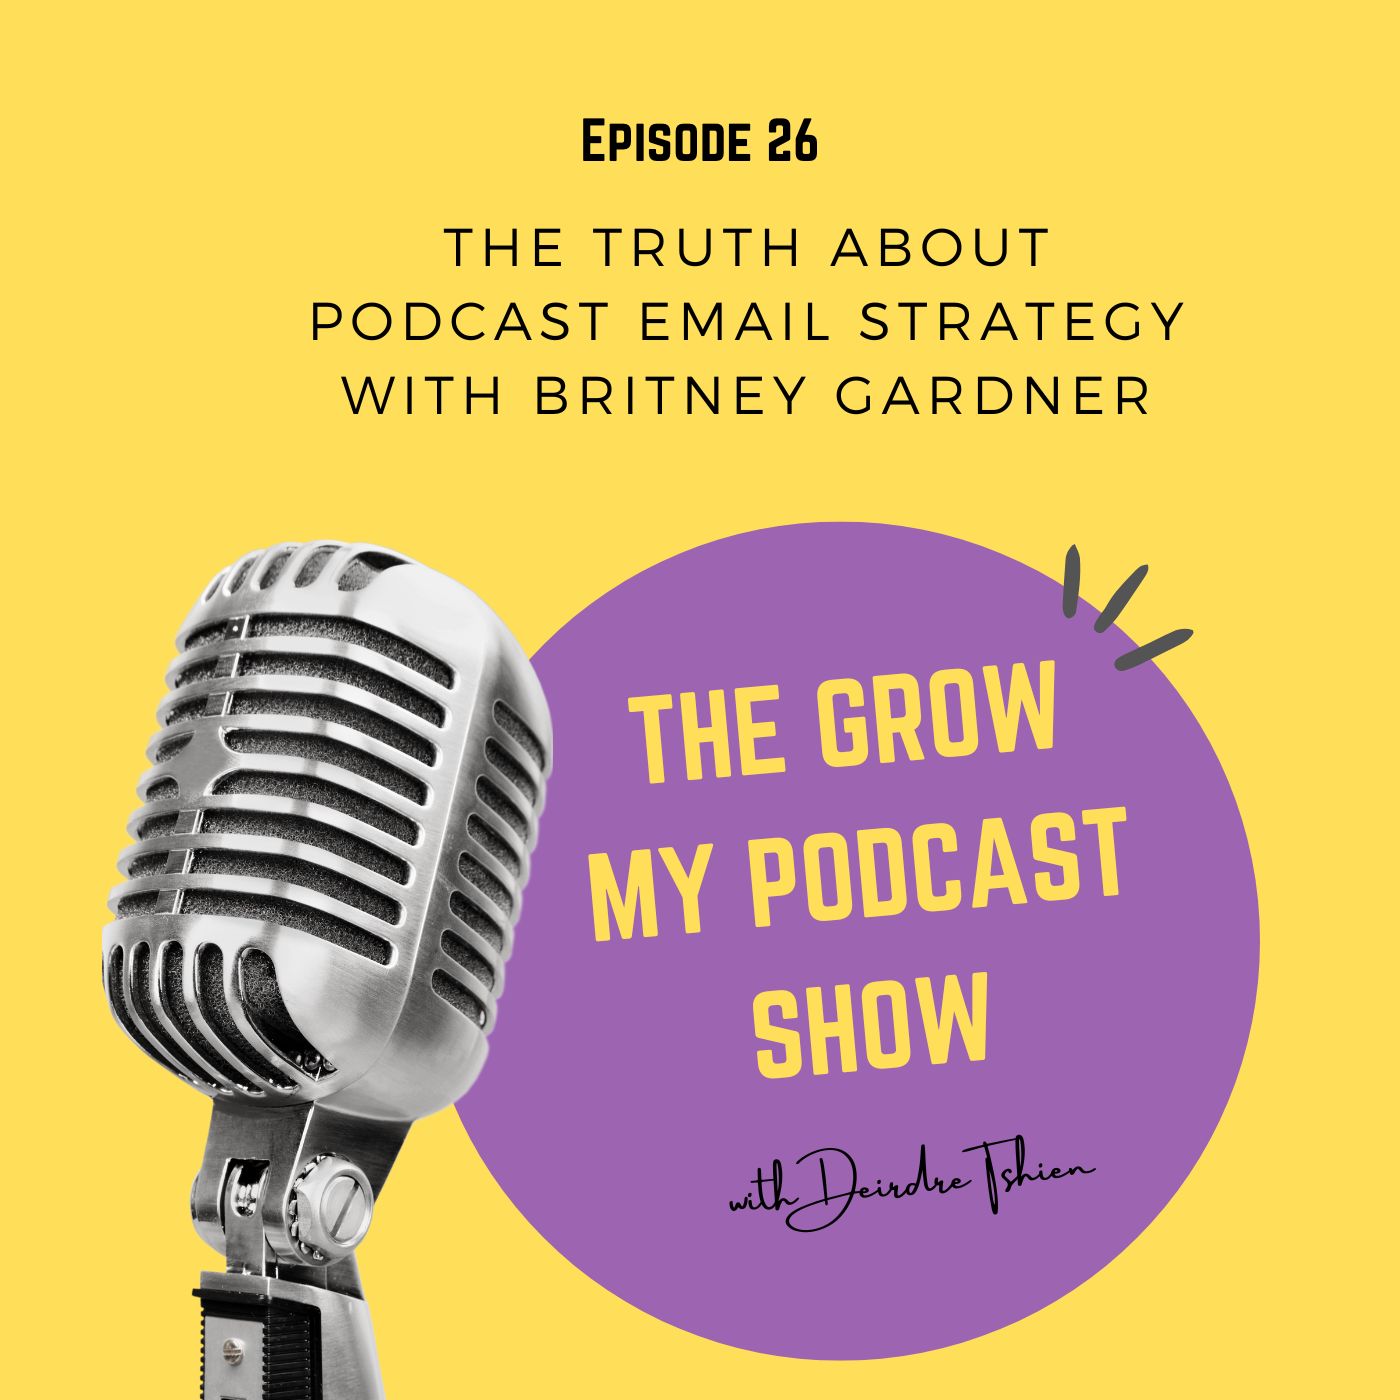 26. The Truth About Podcast Email Strategy with Britney Gardner Image